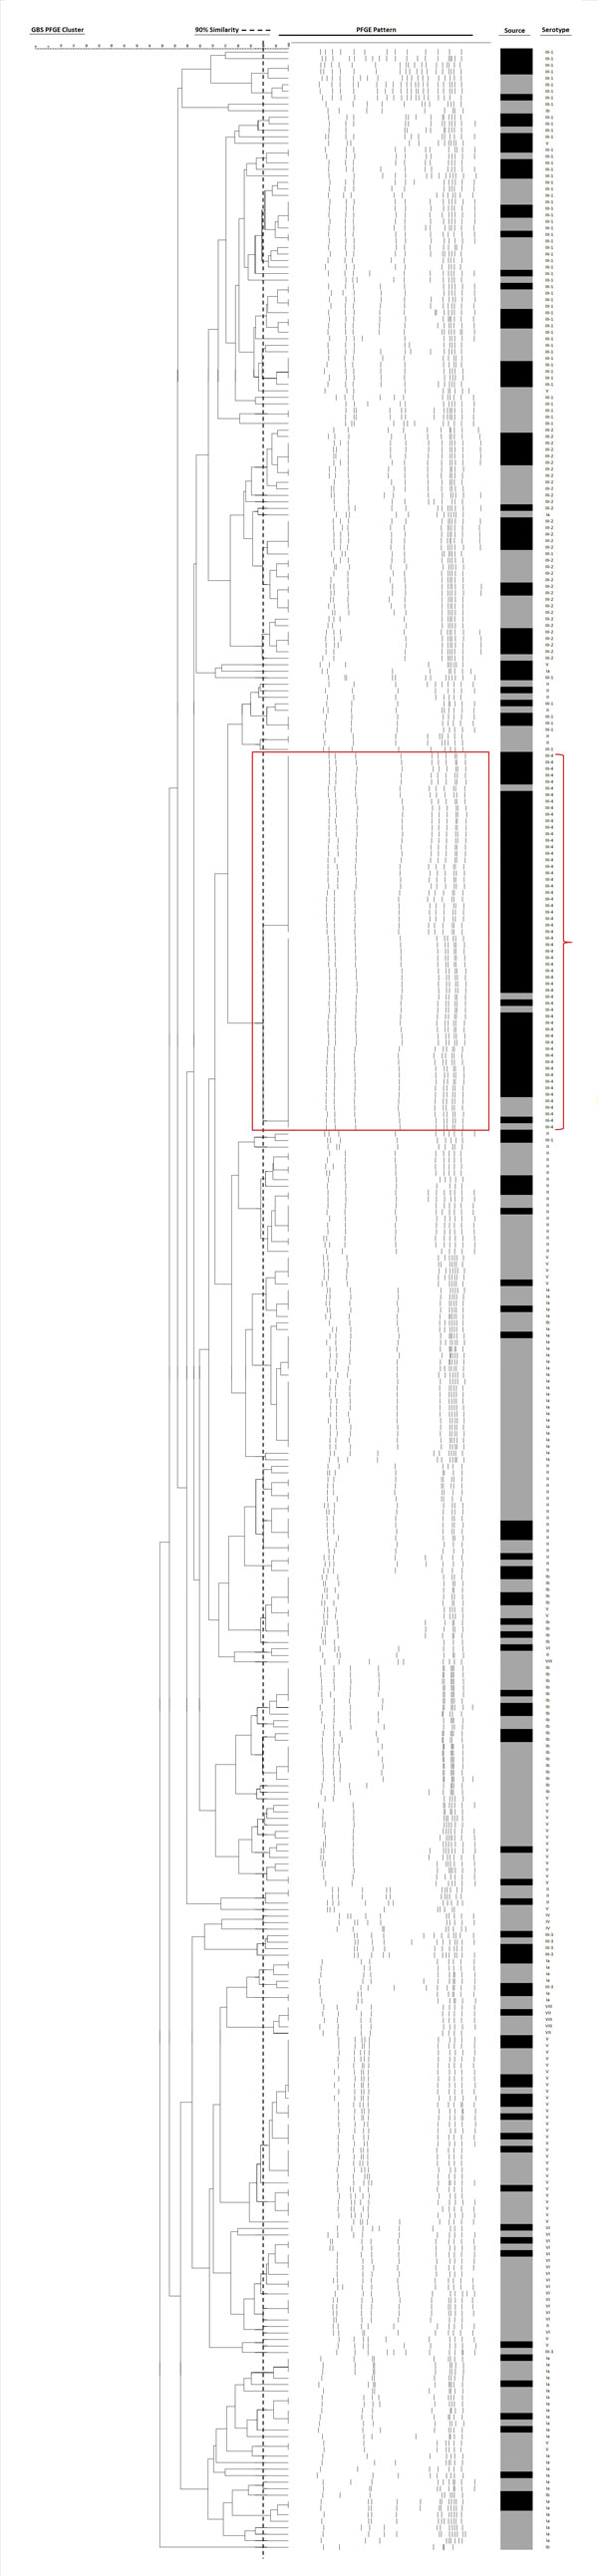 Dendrogram analysis of SmaI-digested pulsed-field gel electrophoresis fingerprints of 58 isolates of group B Streptococcus (GBS), serotype III, subtype 4 (fingerprints highlighted in red box and bracket) and of 324 randomly selected GBS isolates of different serotypes, Hong Kong, 1993–2012. The dotted vertical line on the serotype column delineates the pulsed-field gel electrophoresis clustering at 90% similarity, determined by analysis by dice coefficient with 1% tolerance and by the unweighted